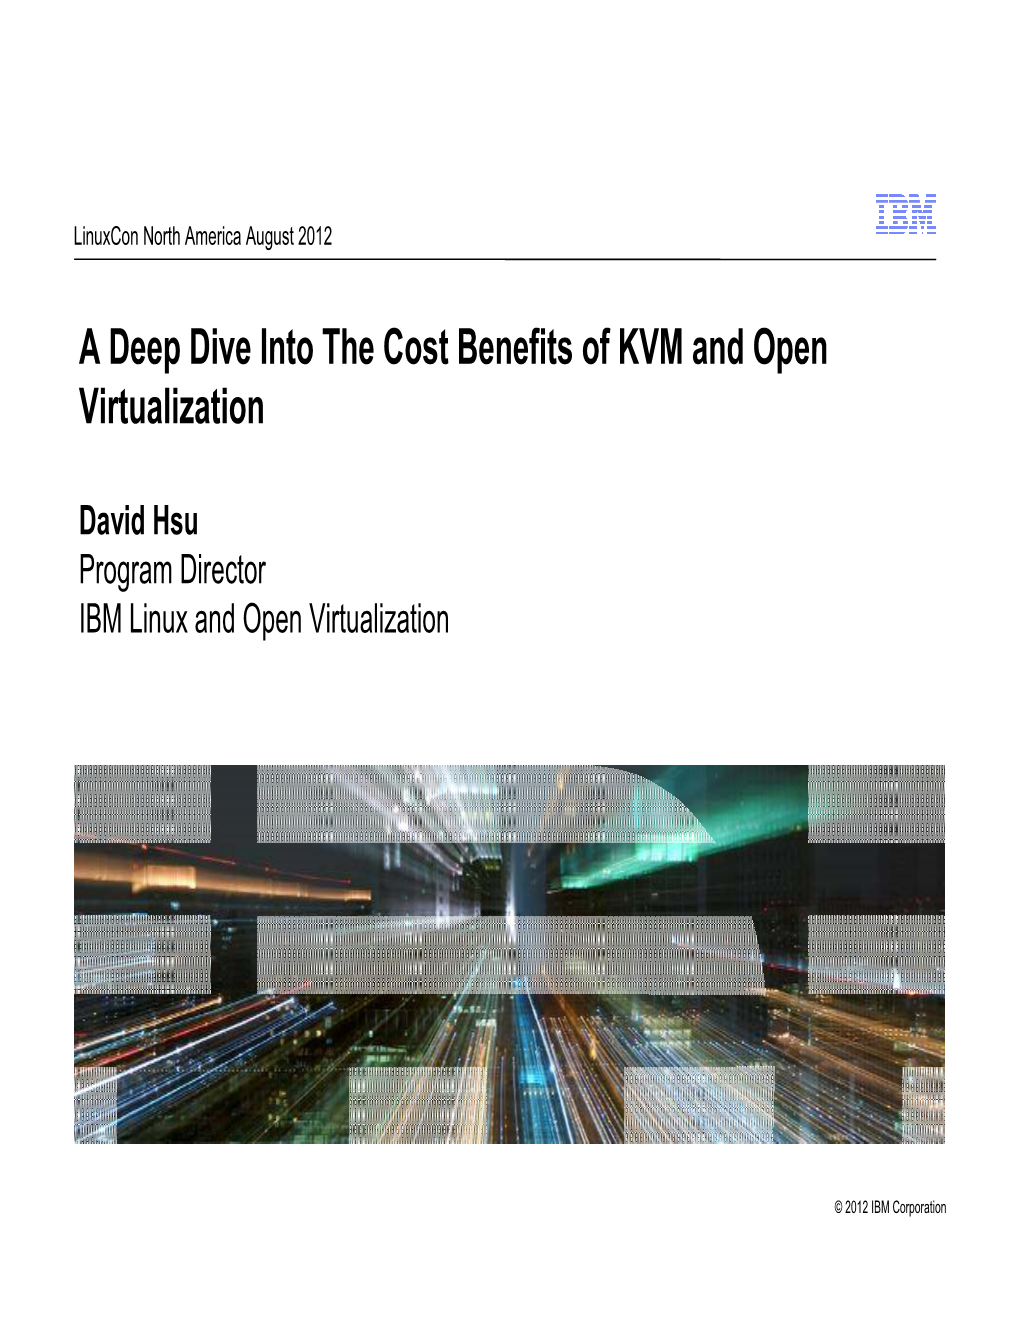 A Deep Dive Into the Cost Benefits of KVM and Open Virtualization